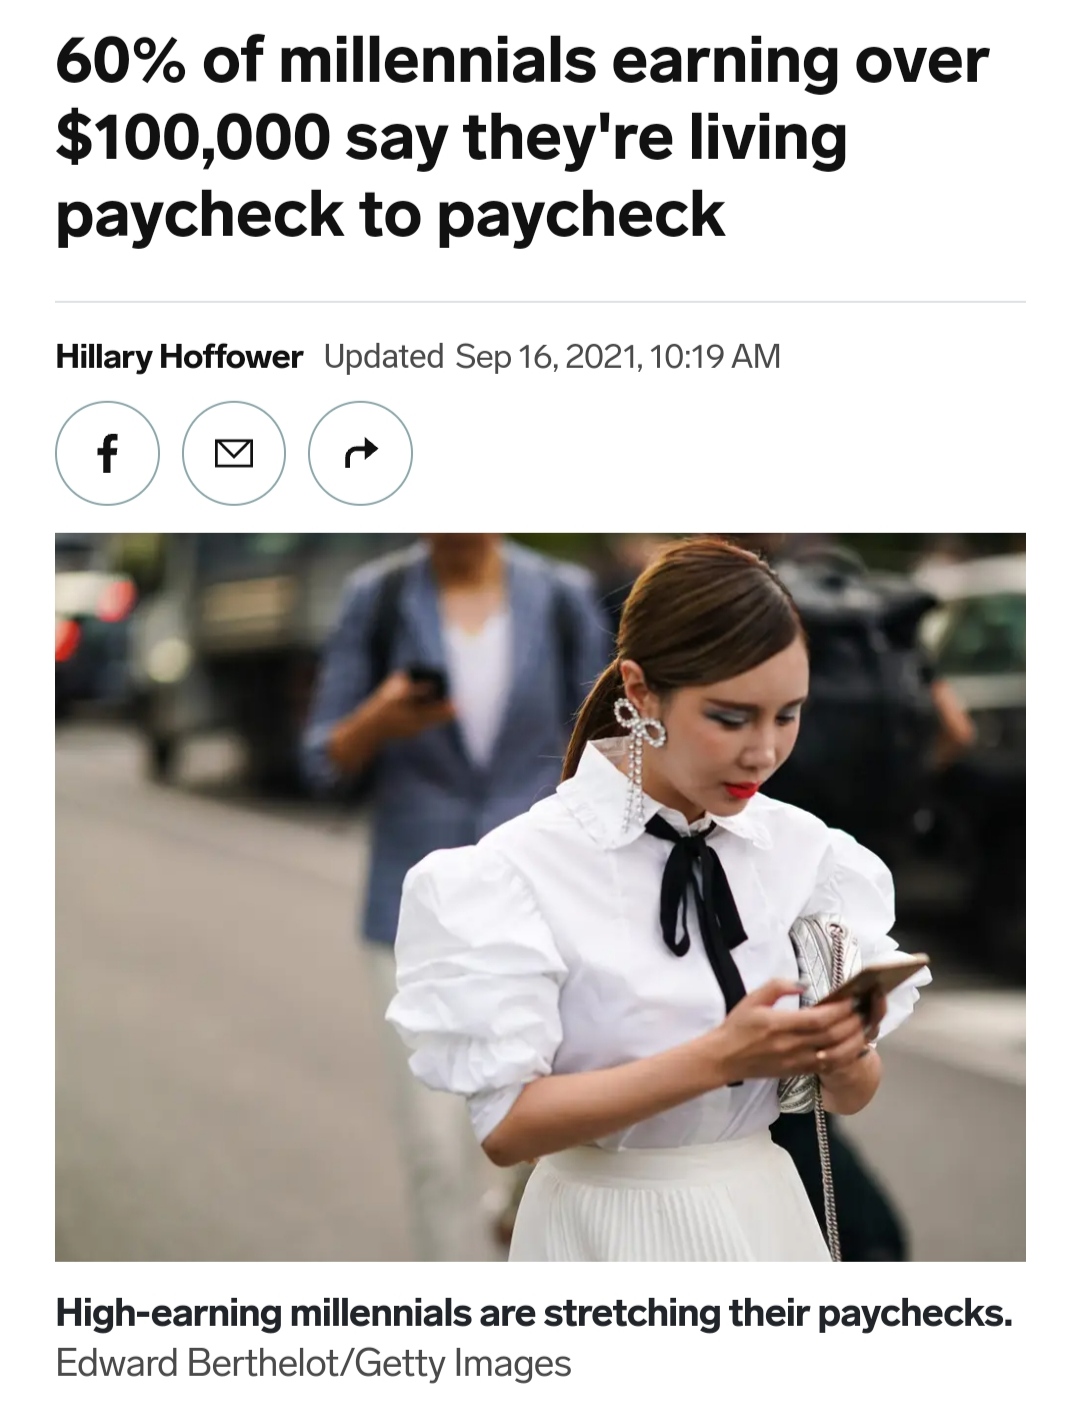 60% of millennials earning over $100,000 say they're living paycheck to paycheck.